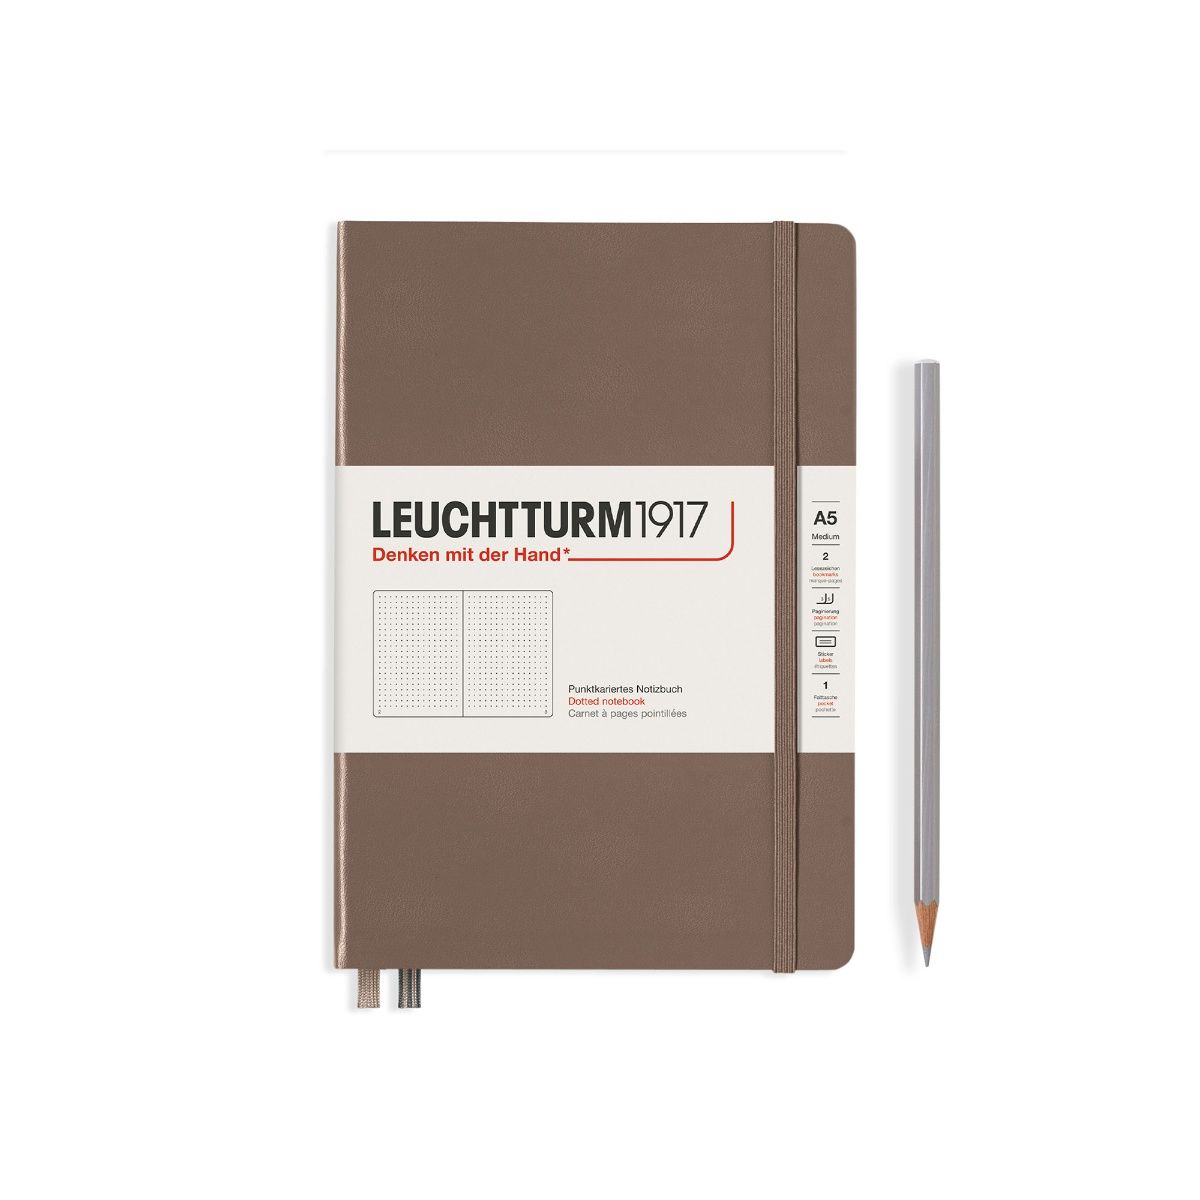 Leuchtturm1917 Medium A5-Size Hard Cover Notebook (Dotted) - Warm Earth Brown